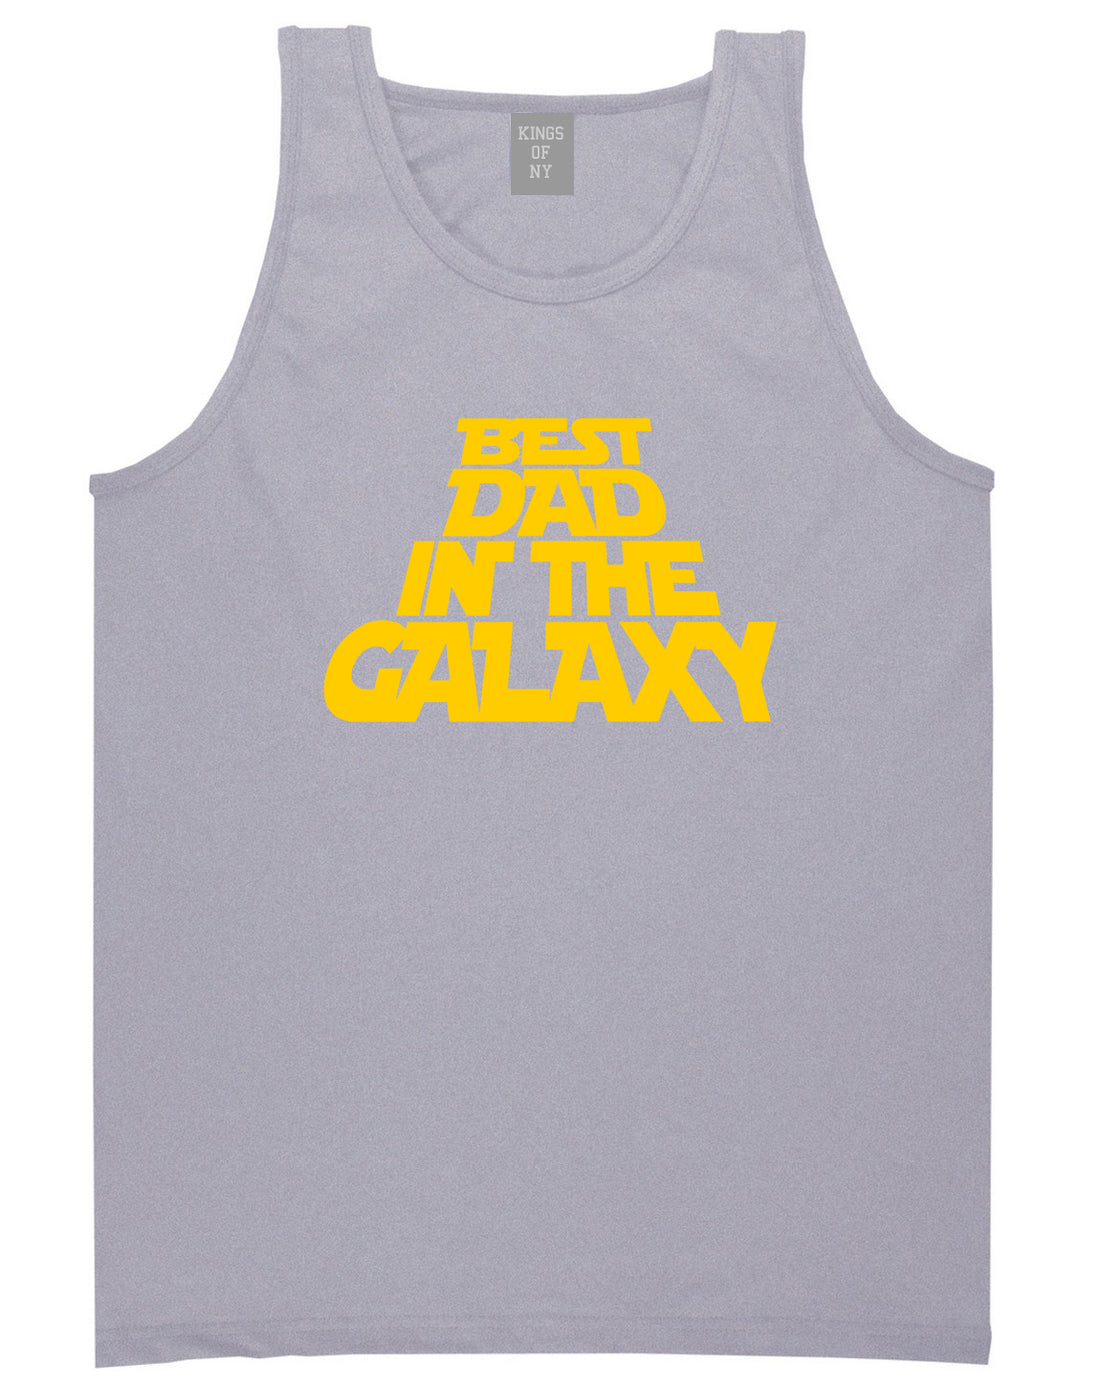 Best Dad In The Galaxy Mens Tank Top T-Shirt Grey